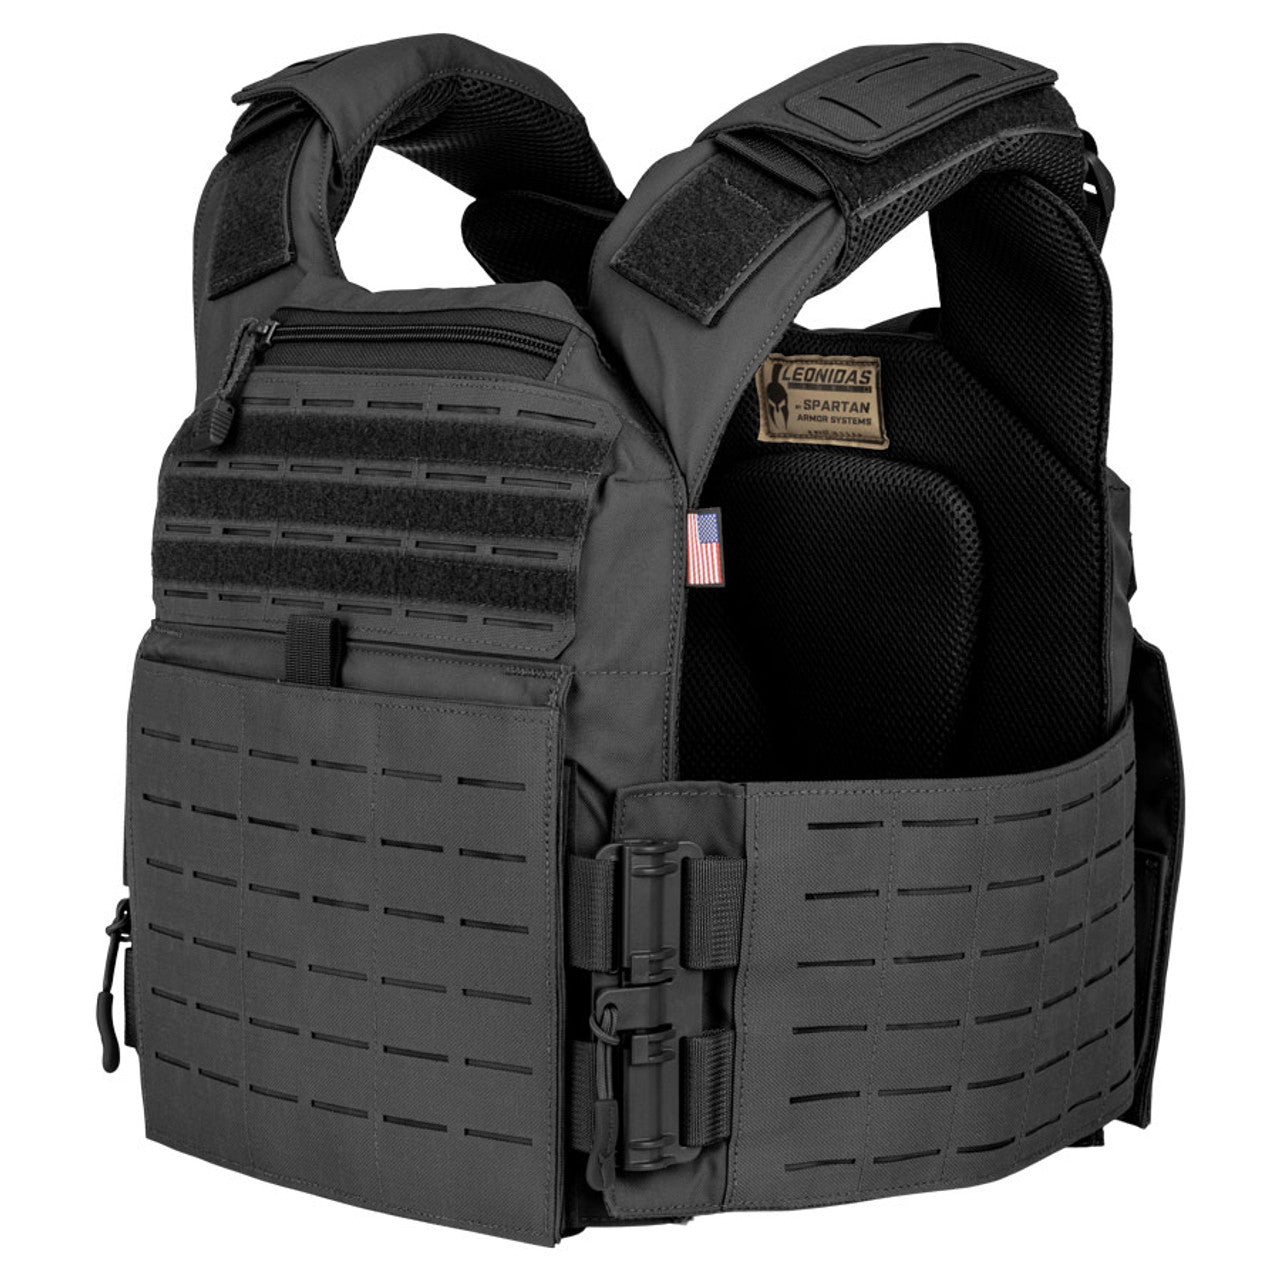 A Spartan Armor Systems Leonidas Legend Plate Carrier - Made in U.S.A. on a white background. (Brand: Pivotal Body Armor)